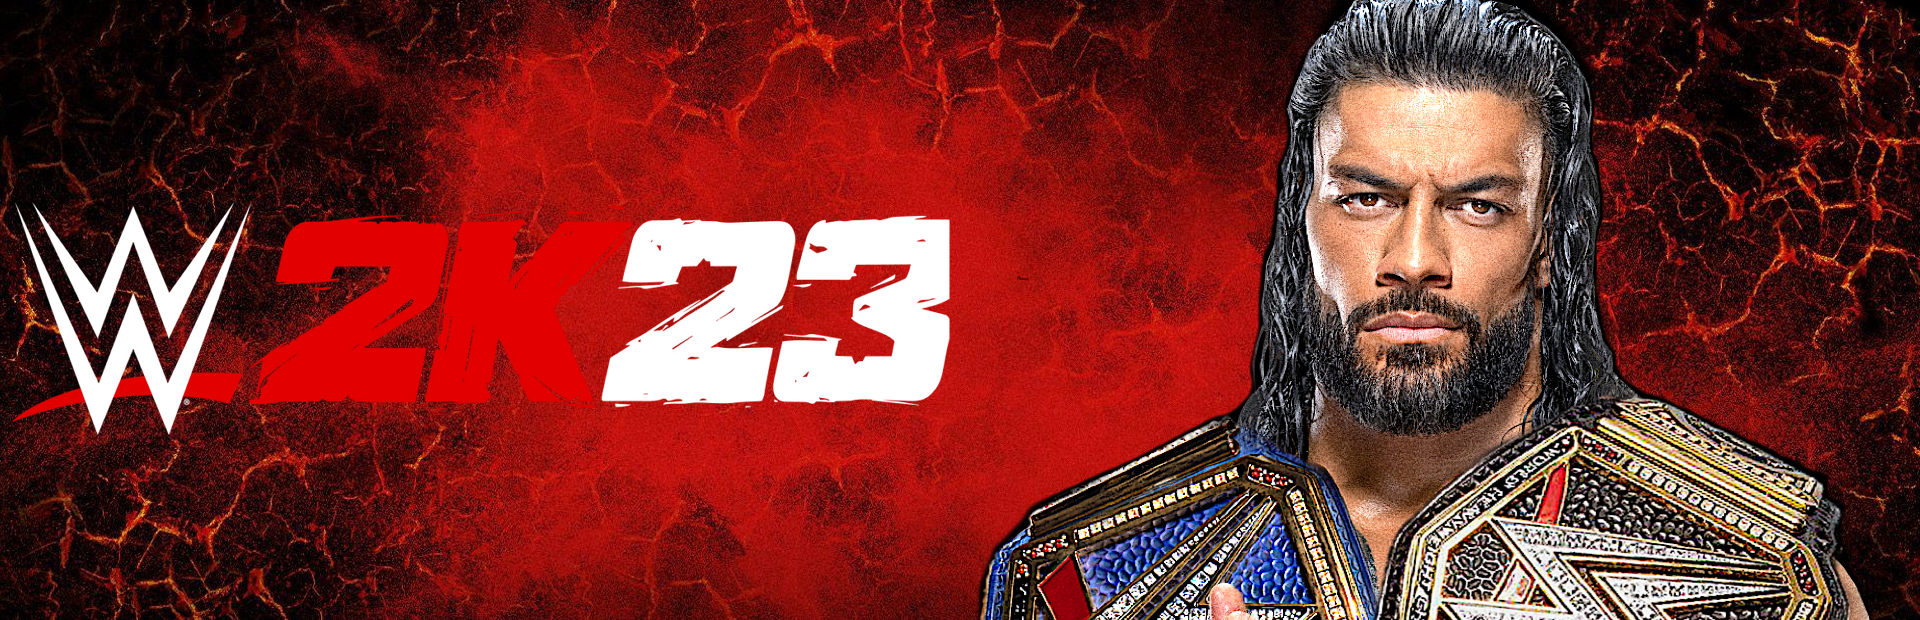 WWE 2K23 Every Confirmed Superstar on the Roster So Far